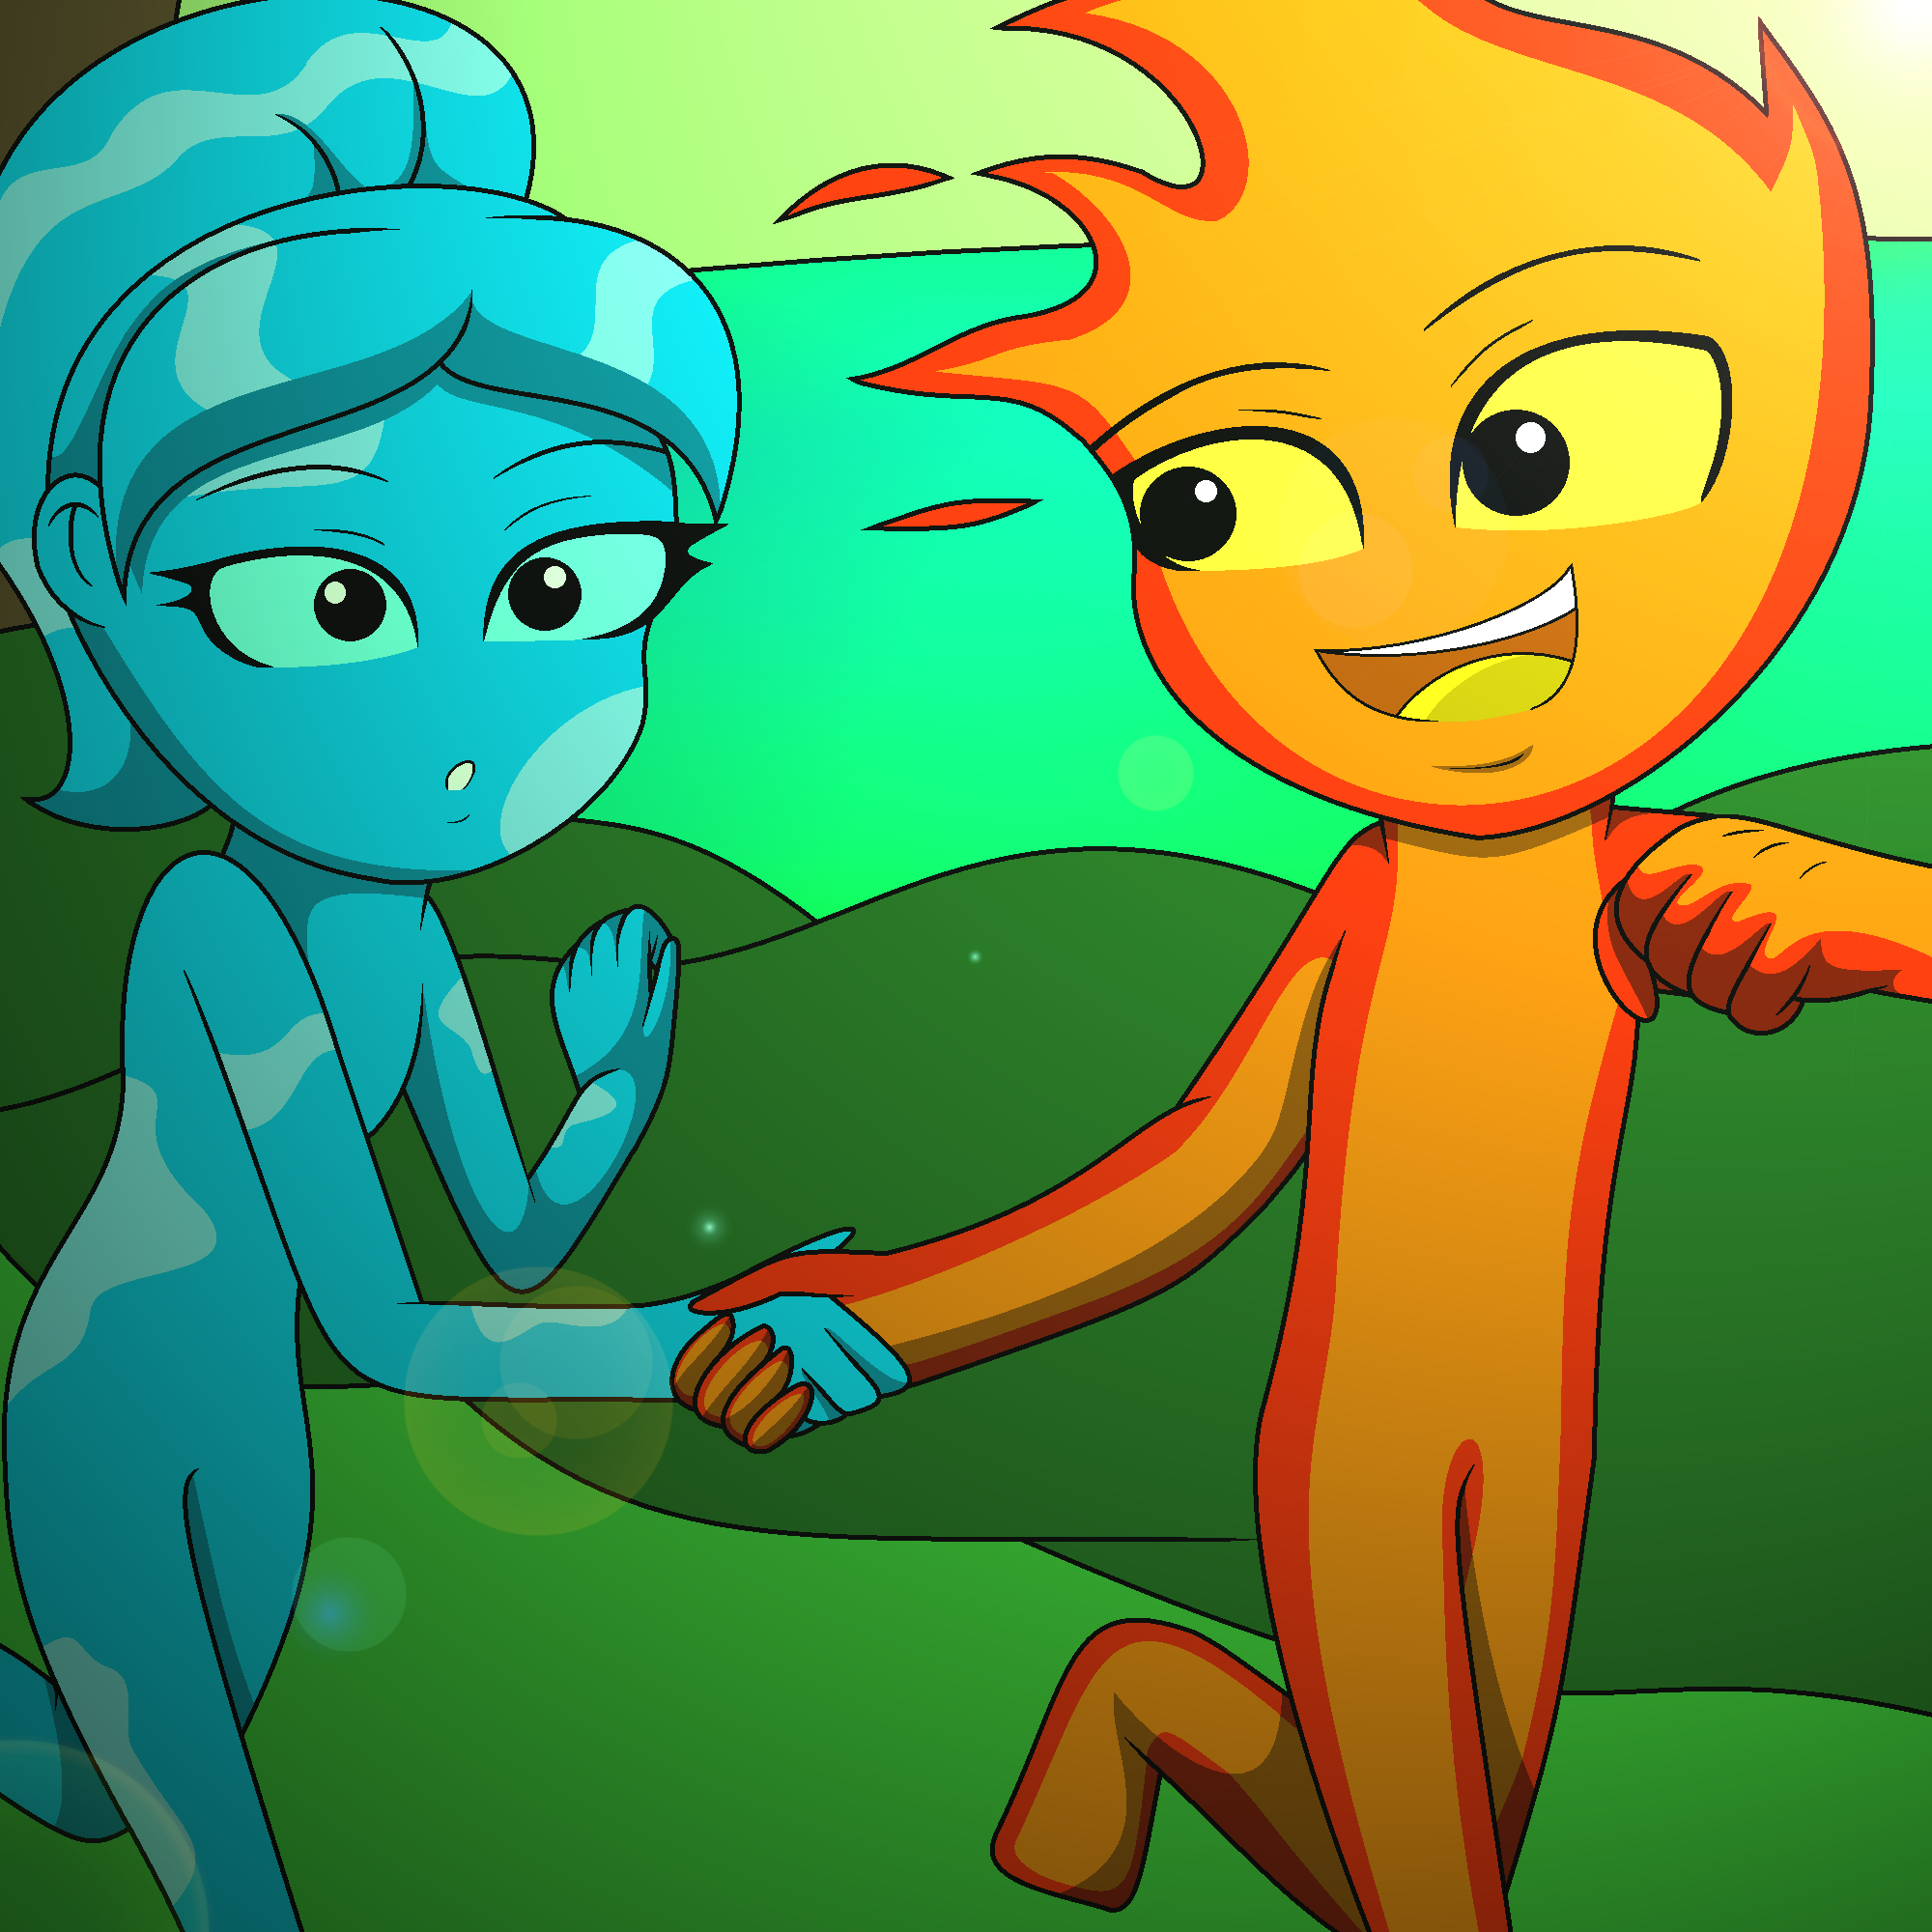 Pixilart - Fire boy and Water girl by DrawingPro